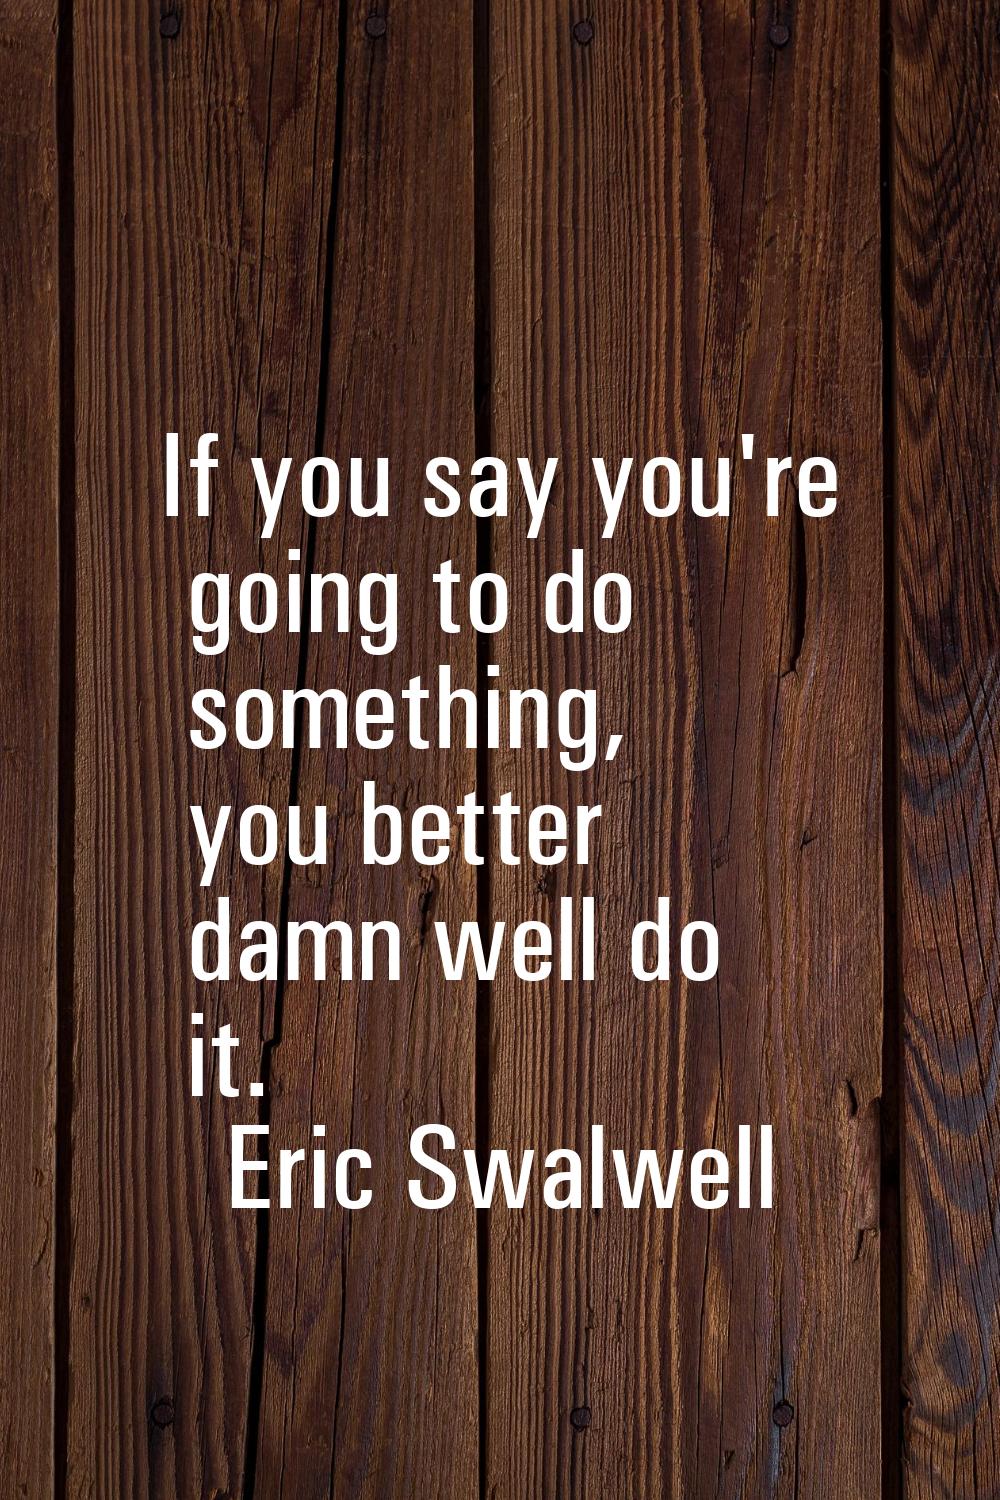 If you say you're going to do something, you better damn well do it.